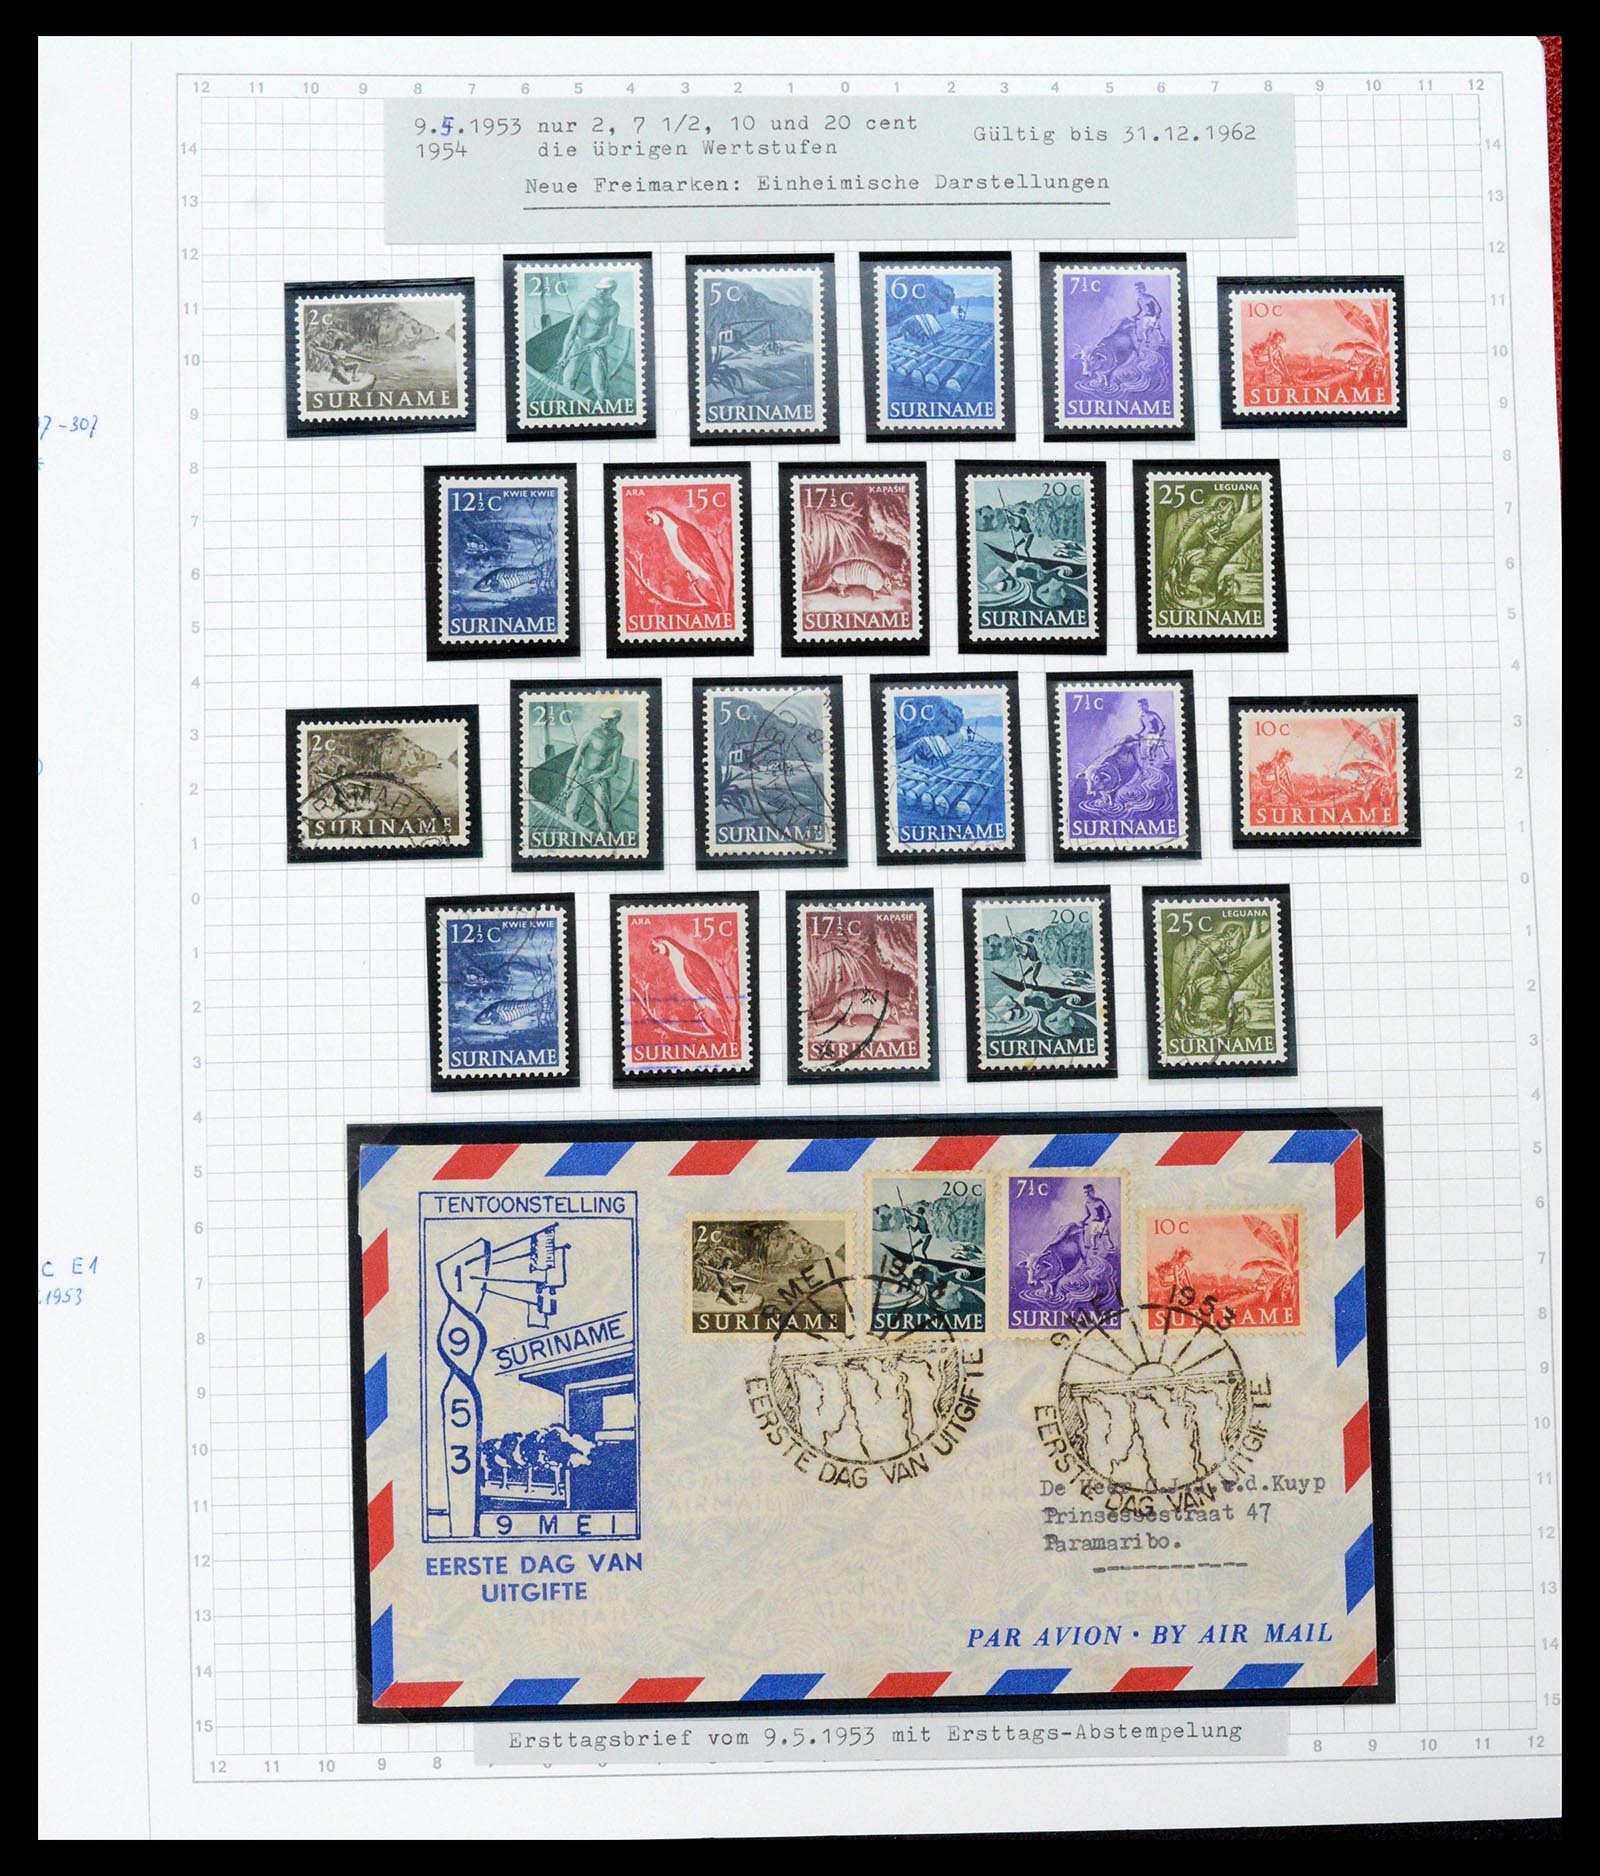 39373 0035 - Stamp collection 39373 Suriname 1873-1975.